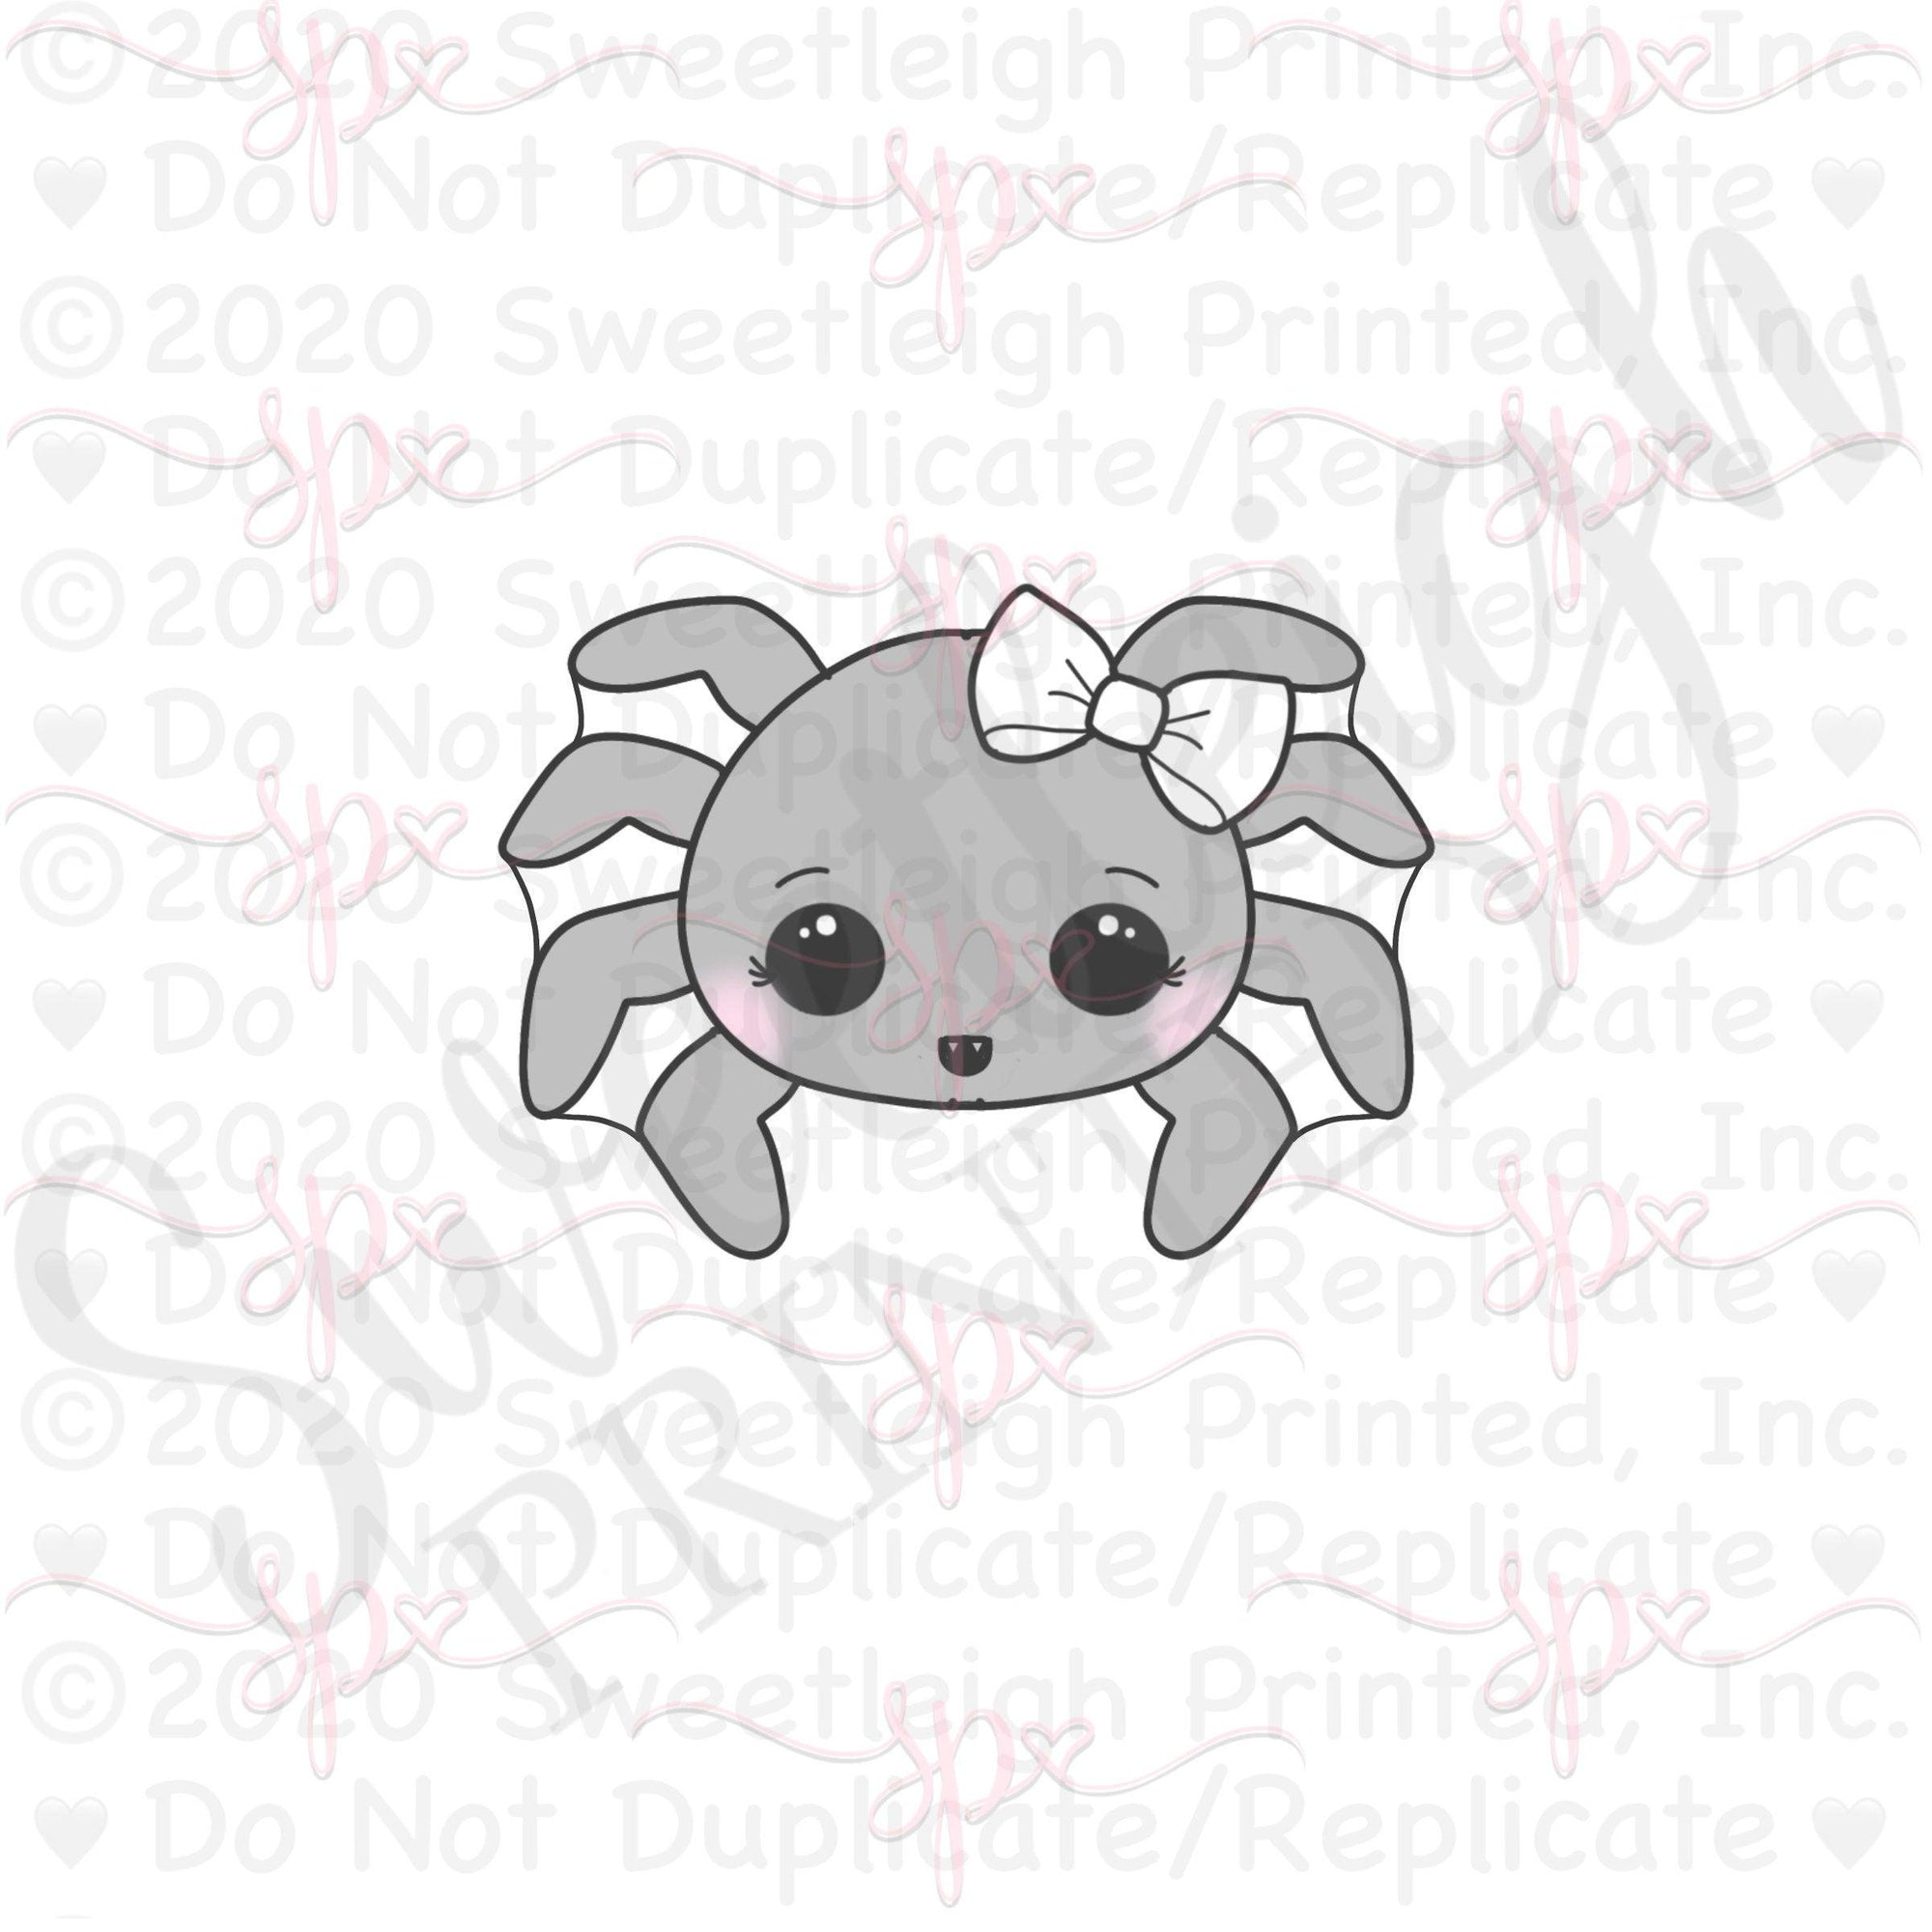 Girly Chubby Spider 2020 Cookie Cutter - Sweetleigh 